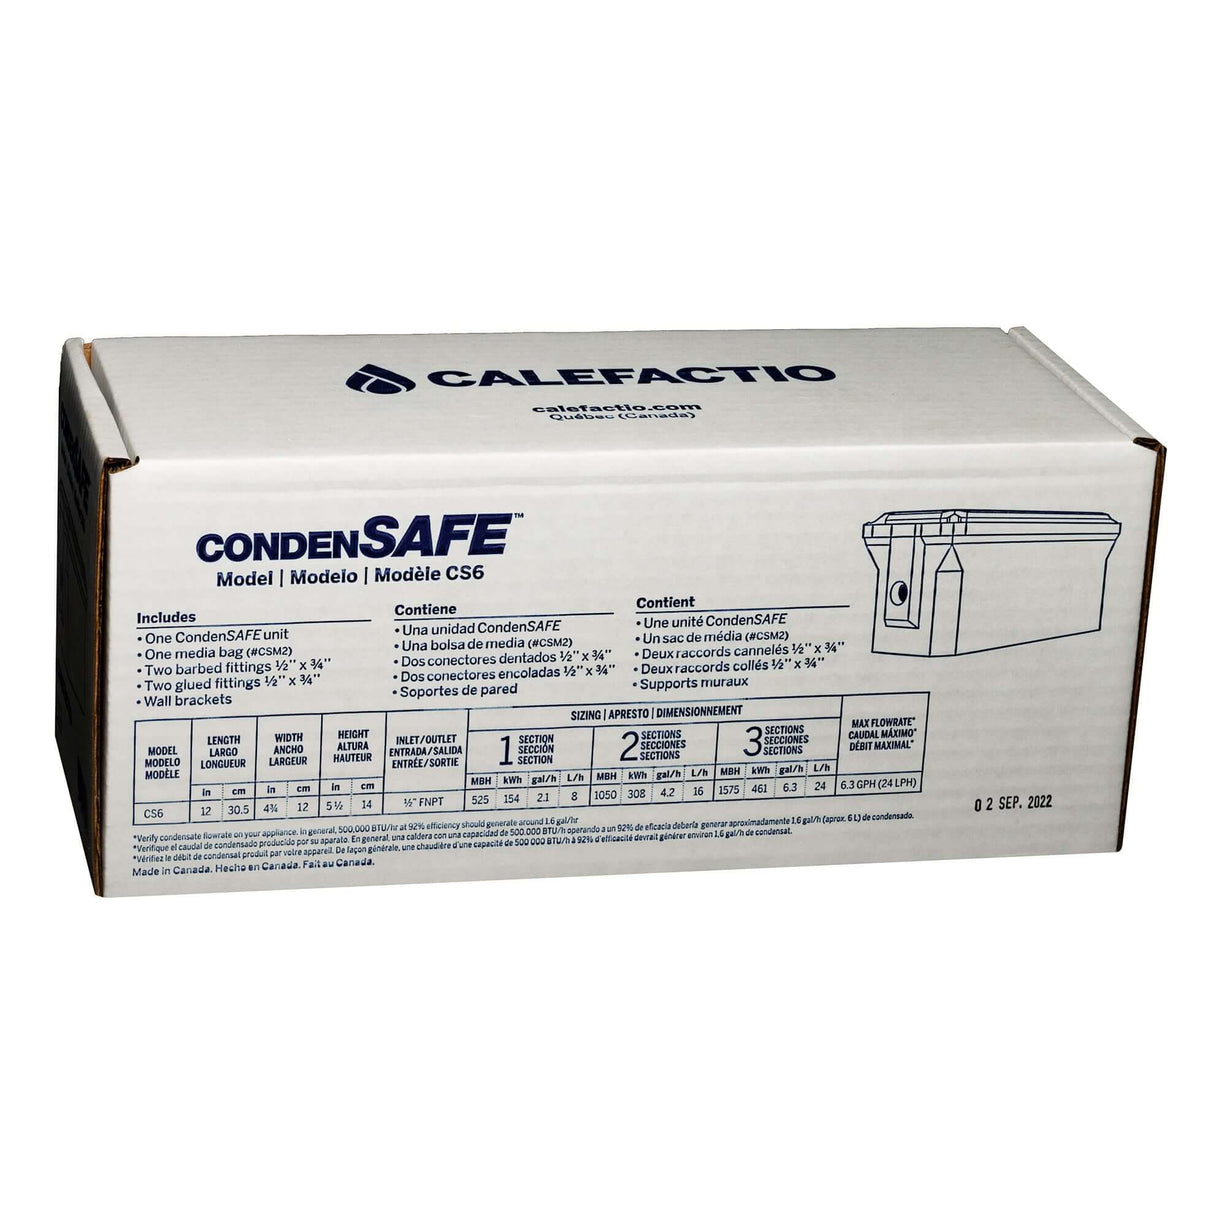 Calefactio CS6 Condensafe condensate neutralizer kit for LPG NPG gas boiler and water heater - box